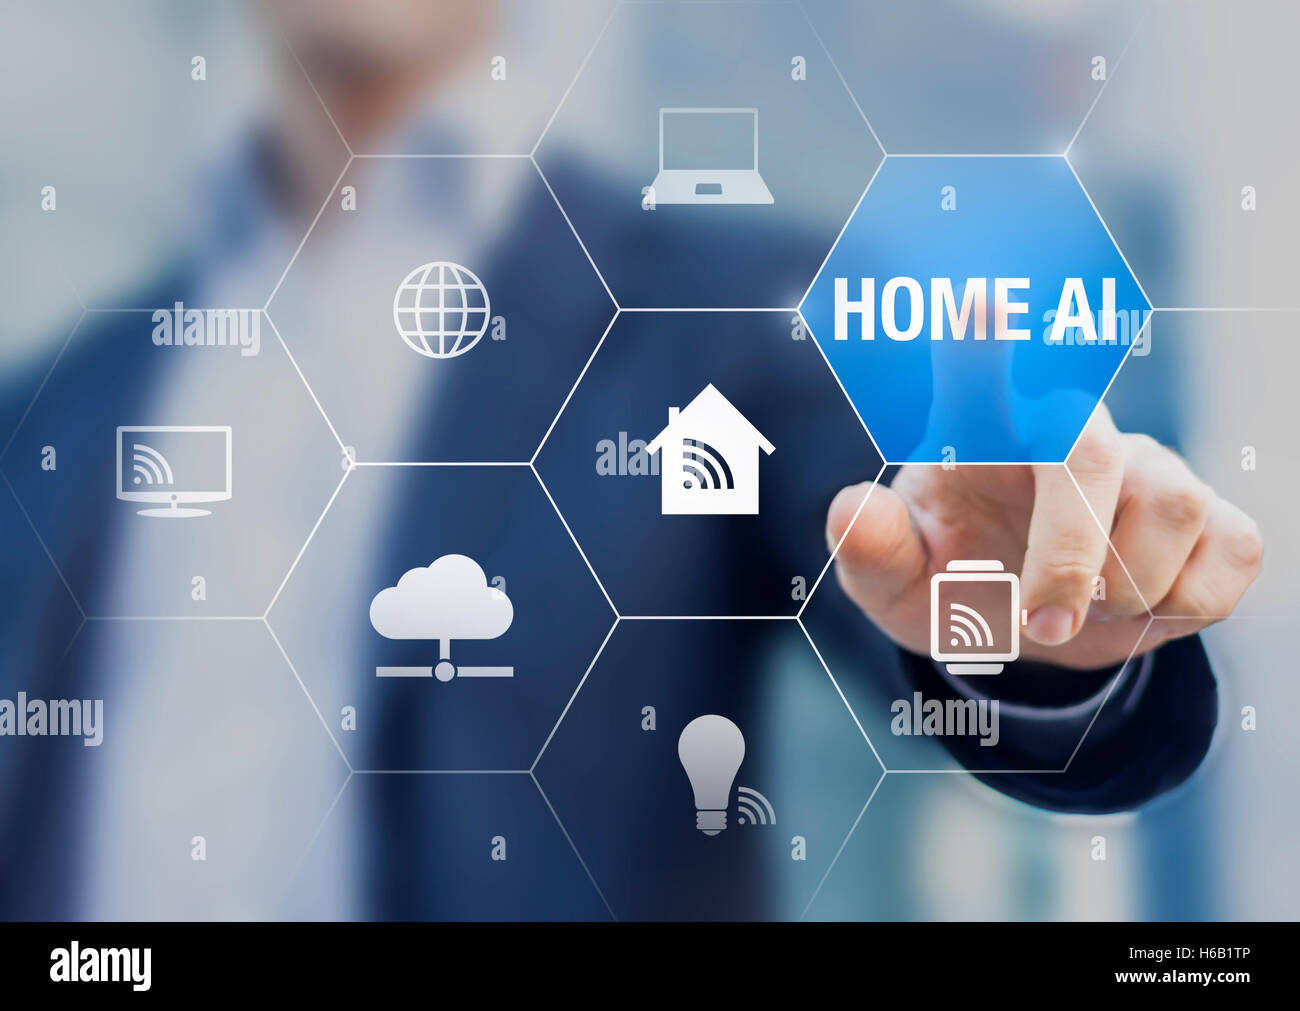 Concept about home ai, artificial intelligence assistant, connected device, commanded by voice Stock Photo